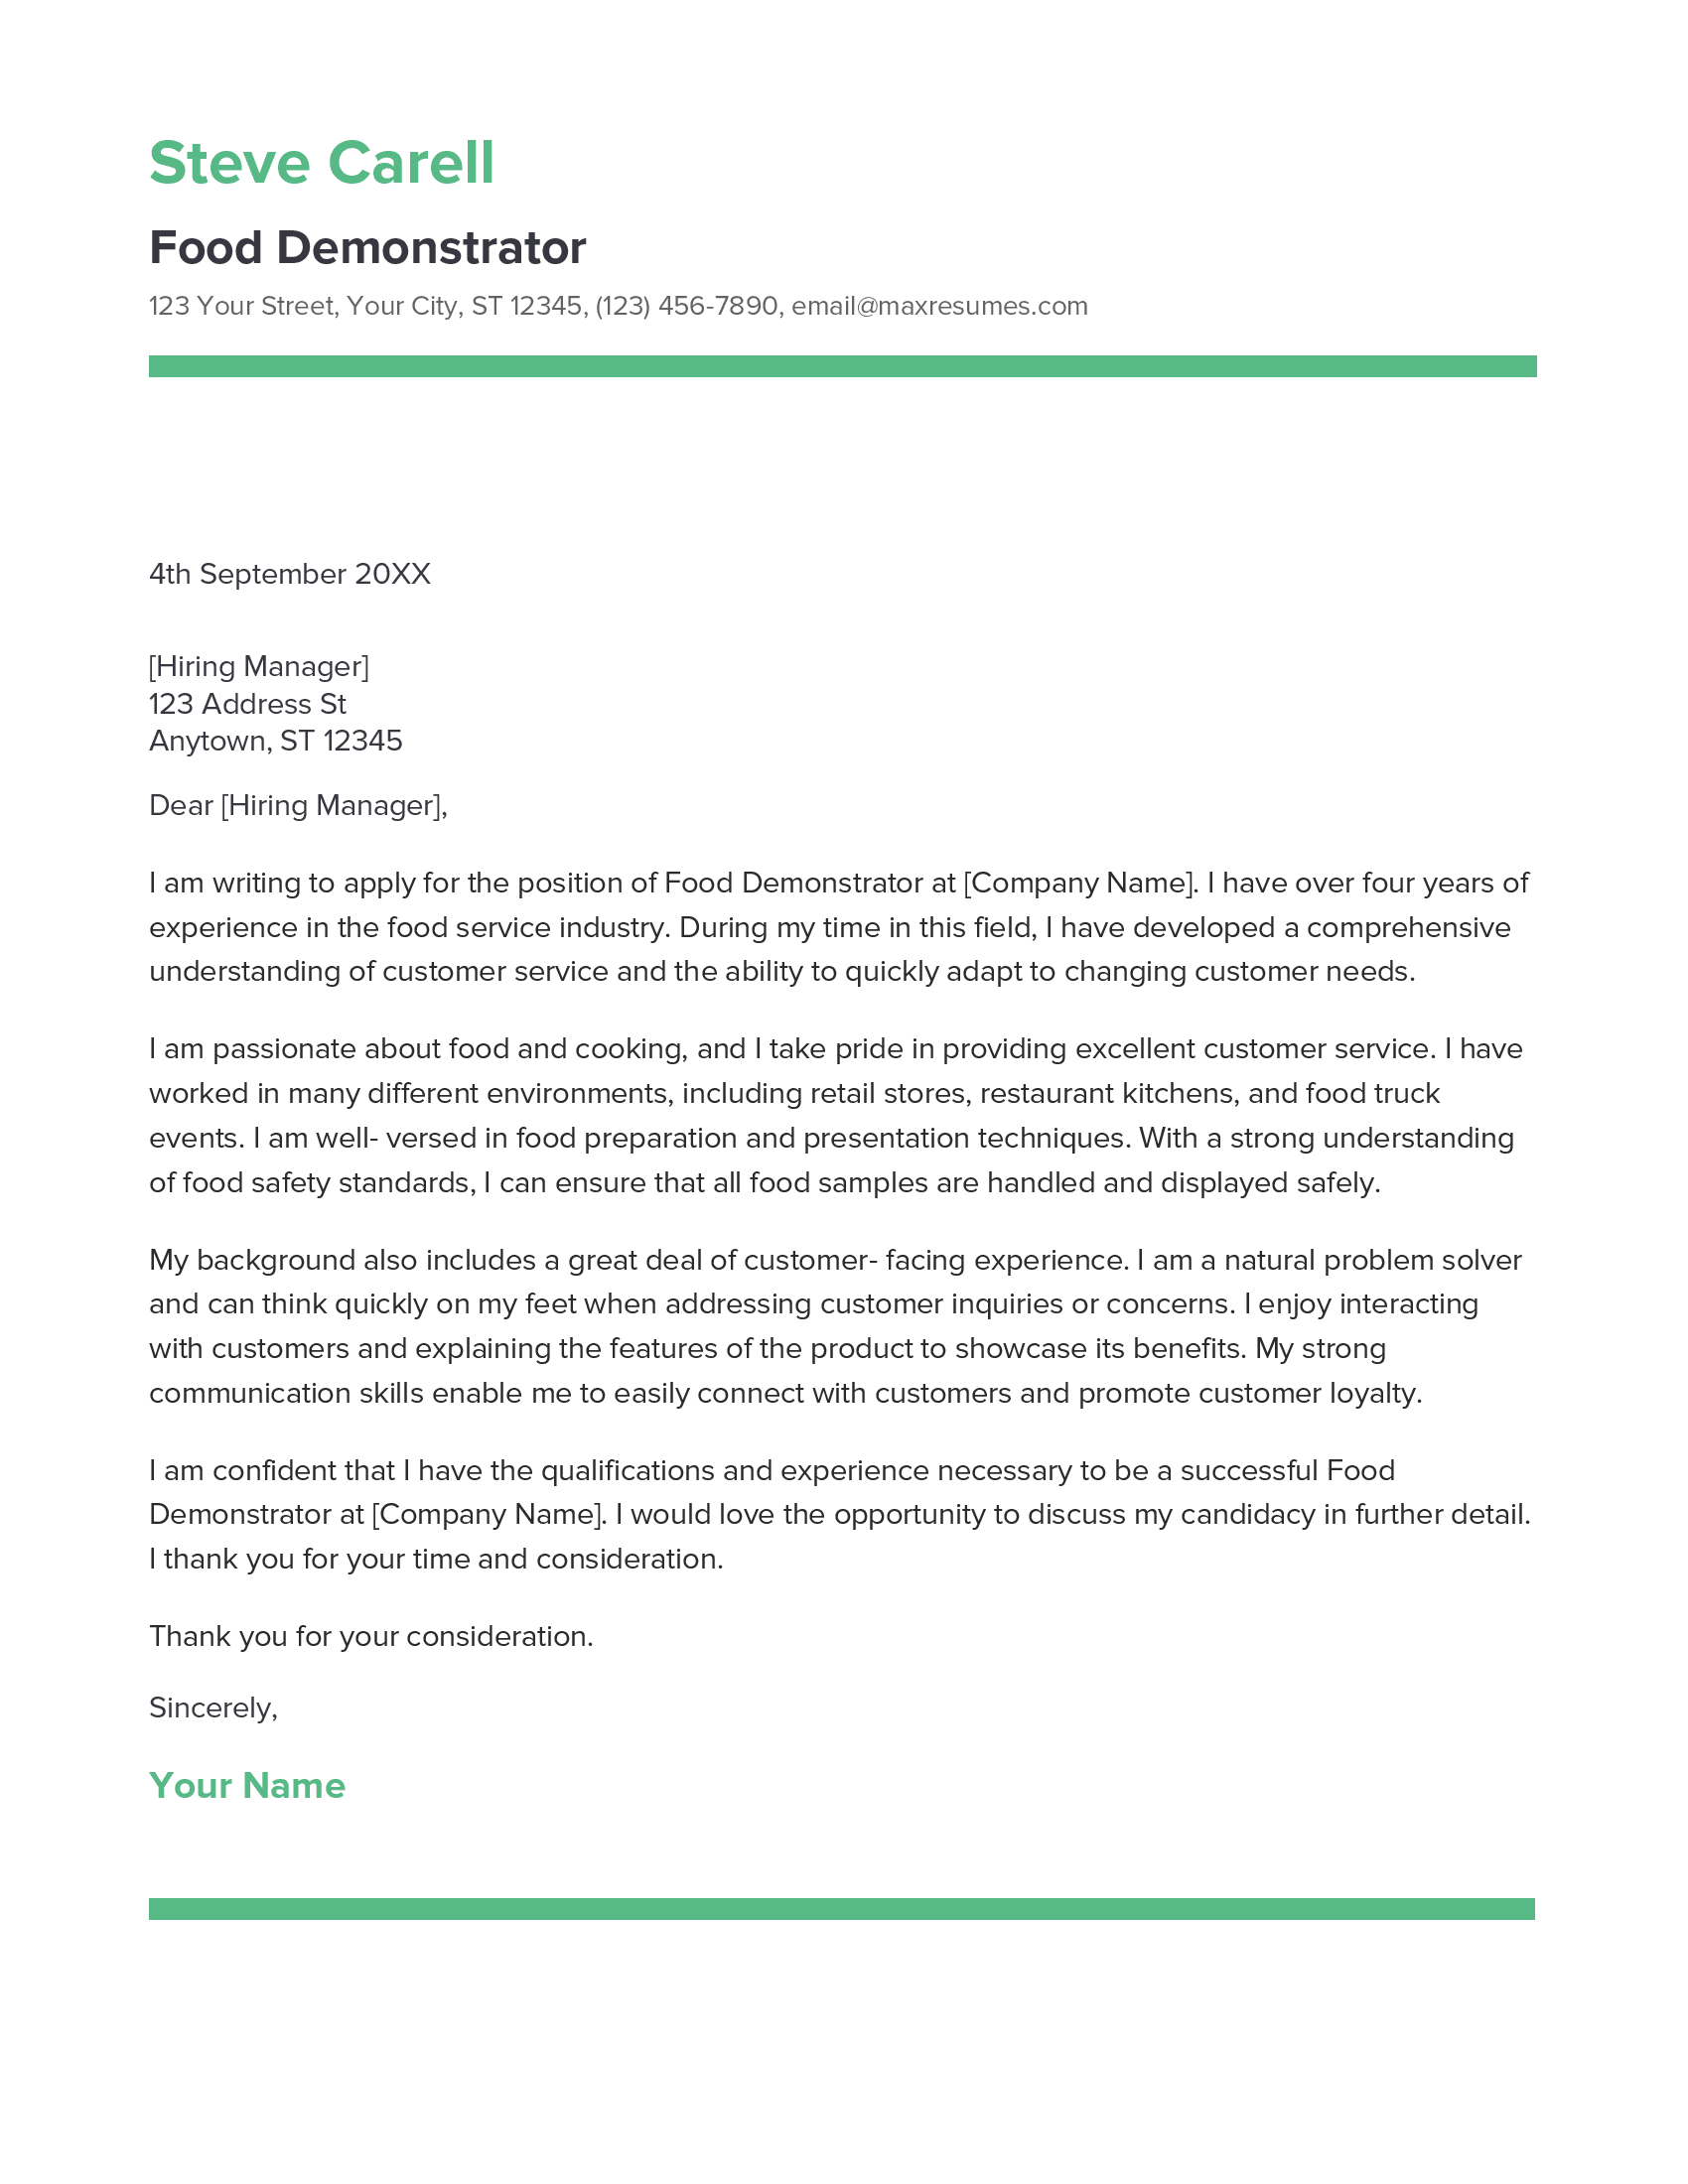 Food Demonstrator Cover Letter Example